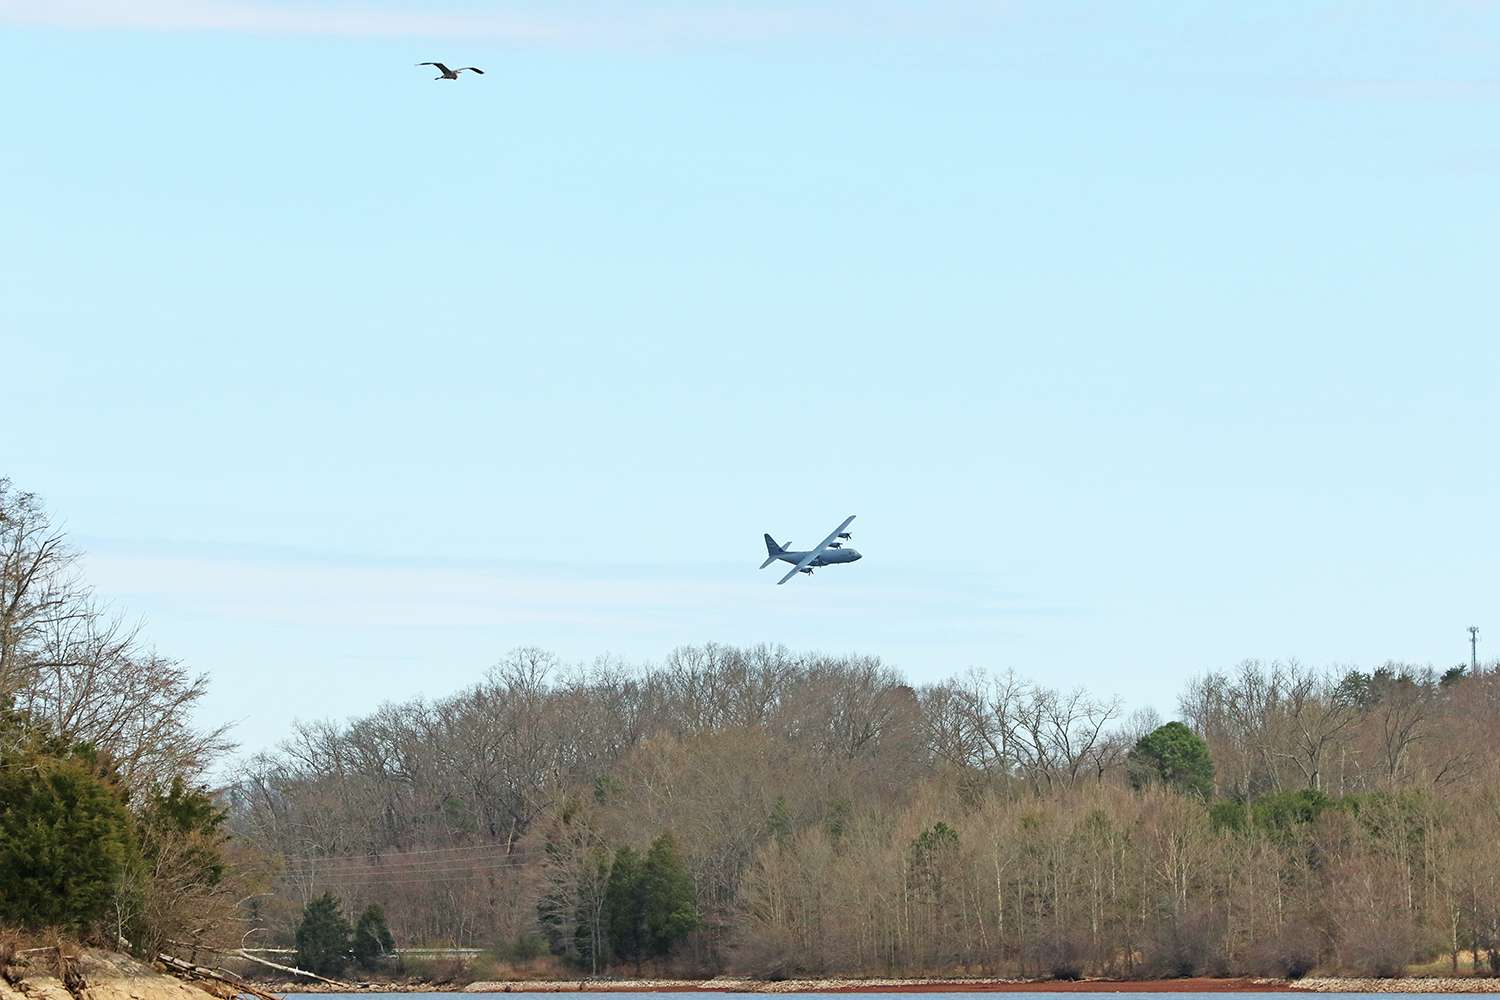 Great blue heron and USAF. 2019 Bassmaster Classic out of Knoxville, Tenn.